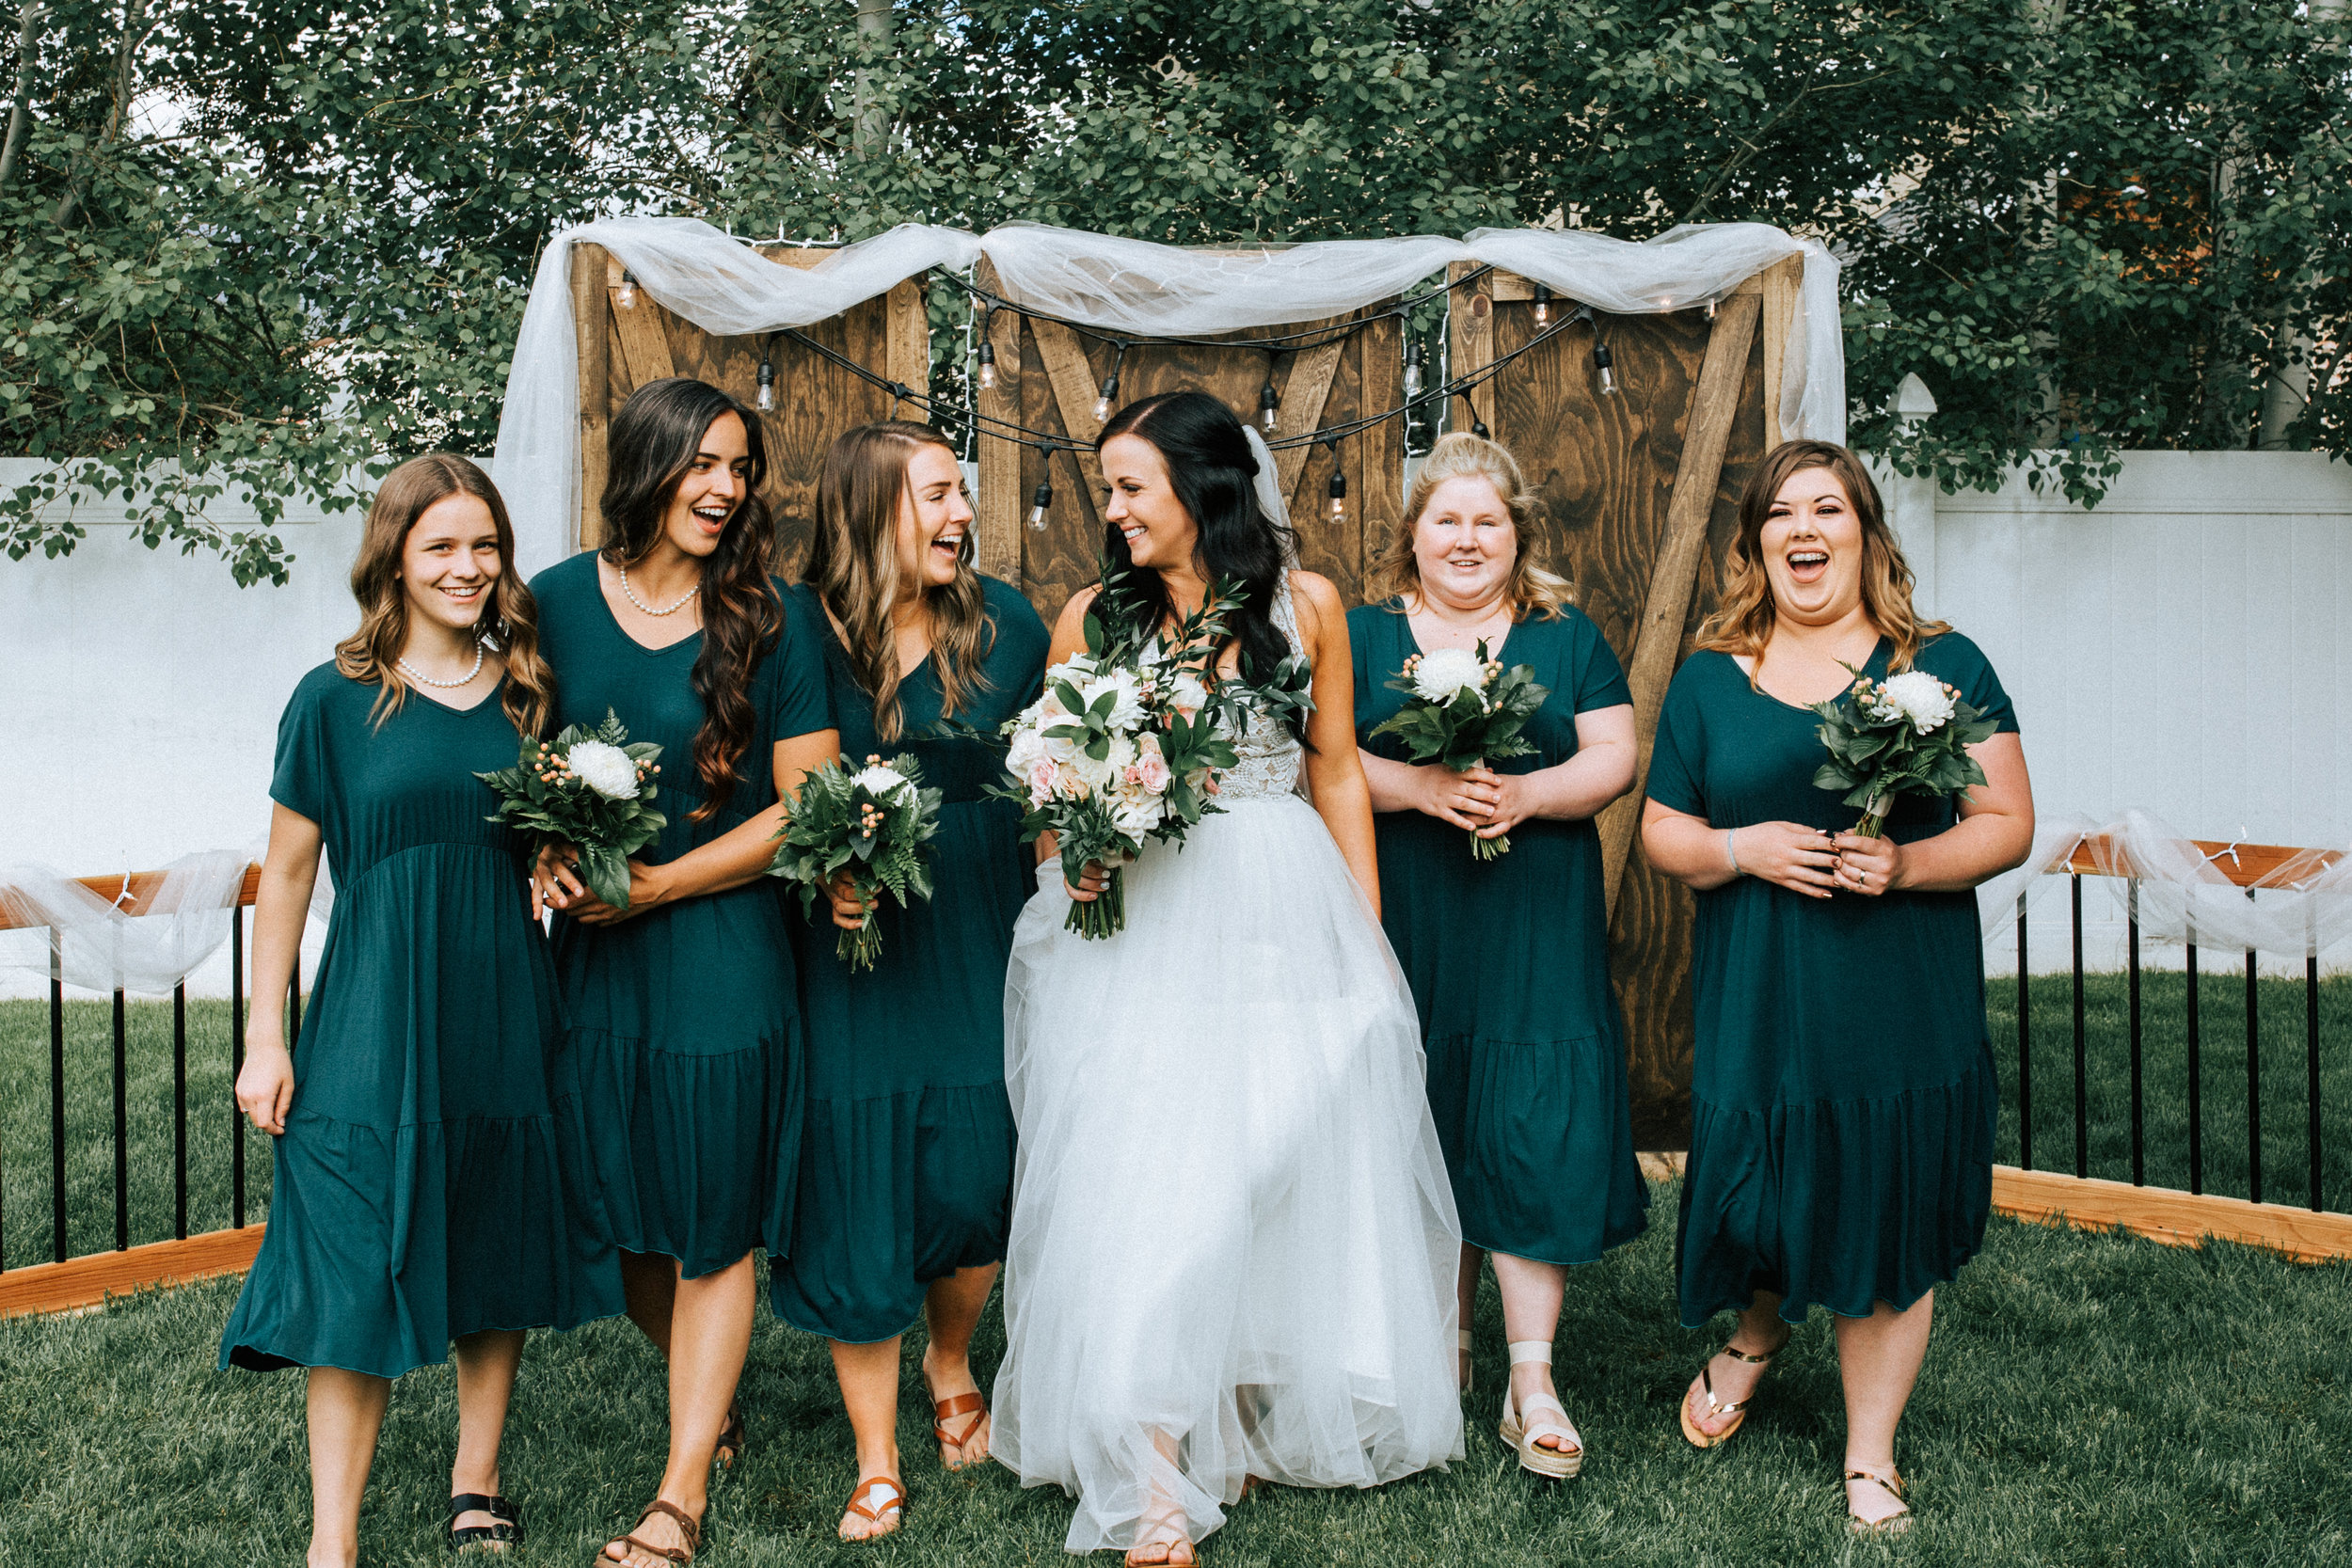 Bridesmaids teal dresses green white bouquets